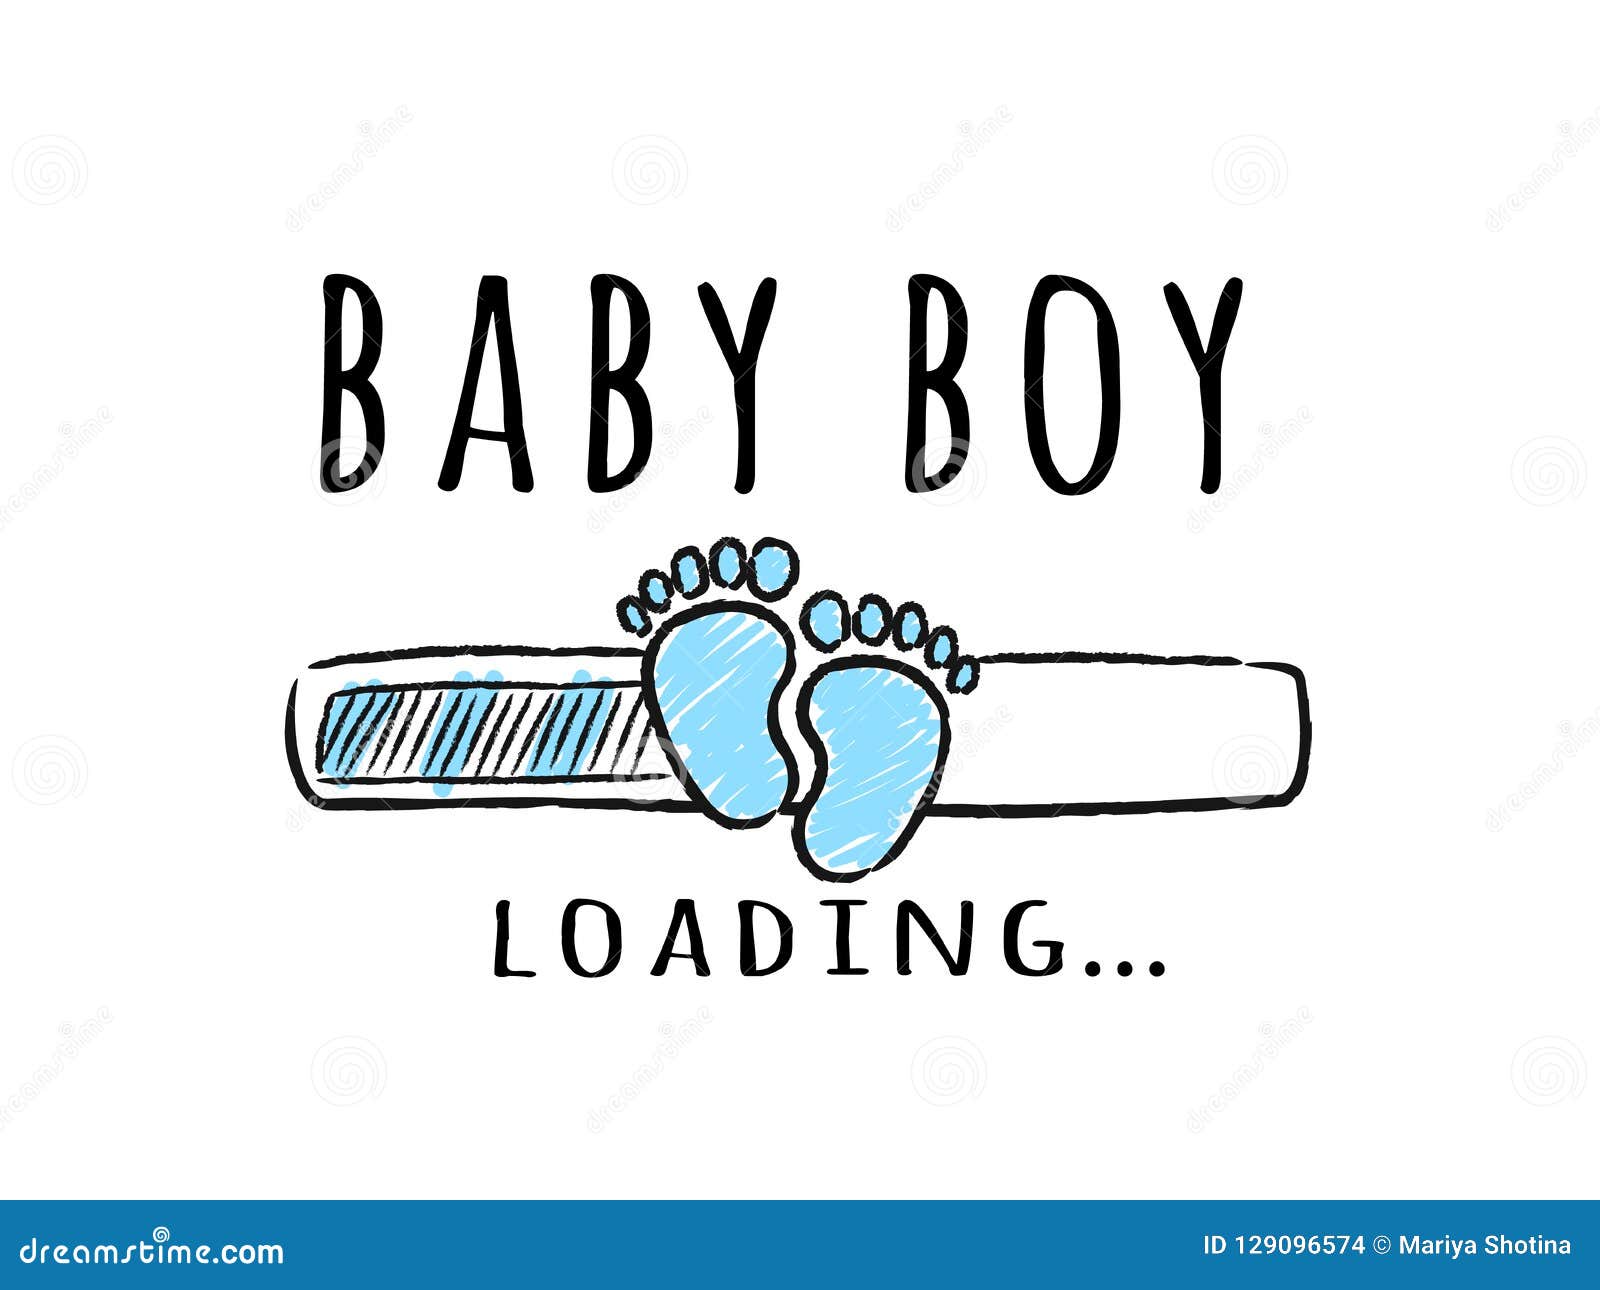 progress bar with inscription - baby boy loading and kid footprints in sketchy style.